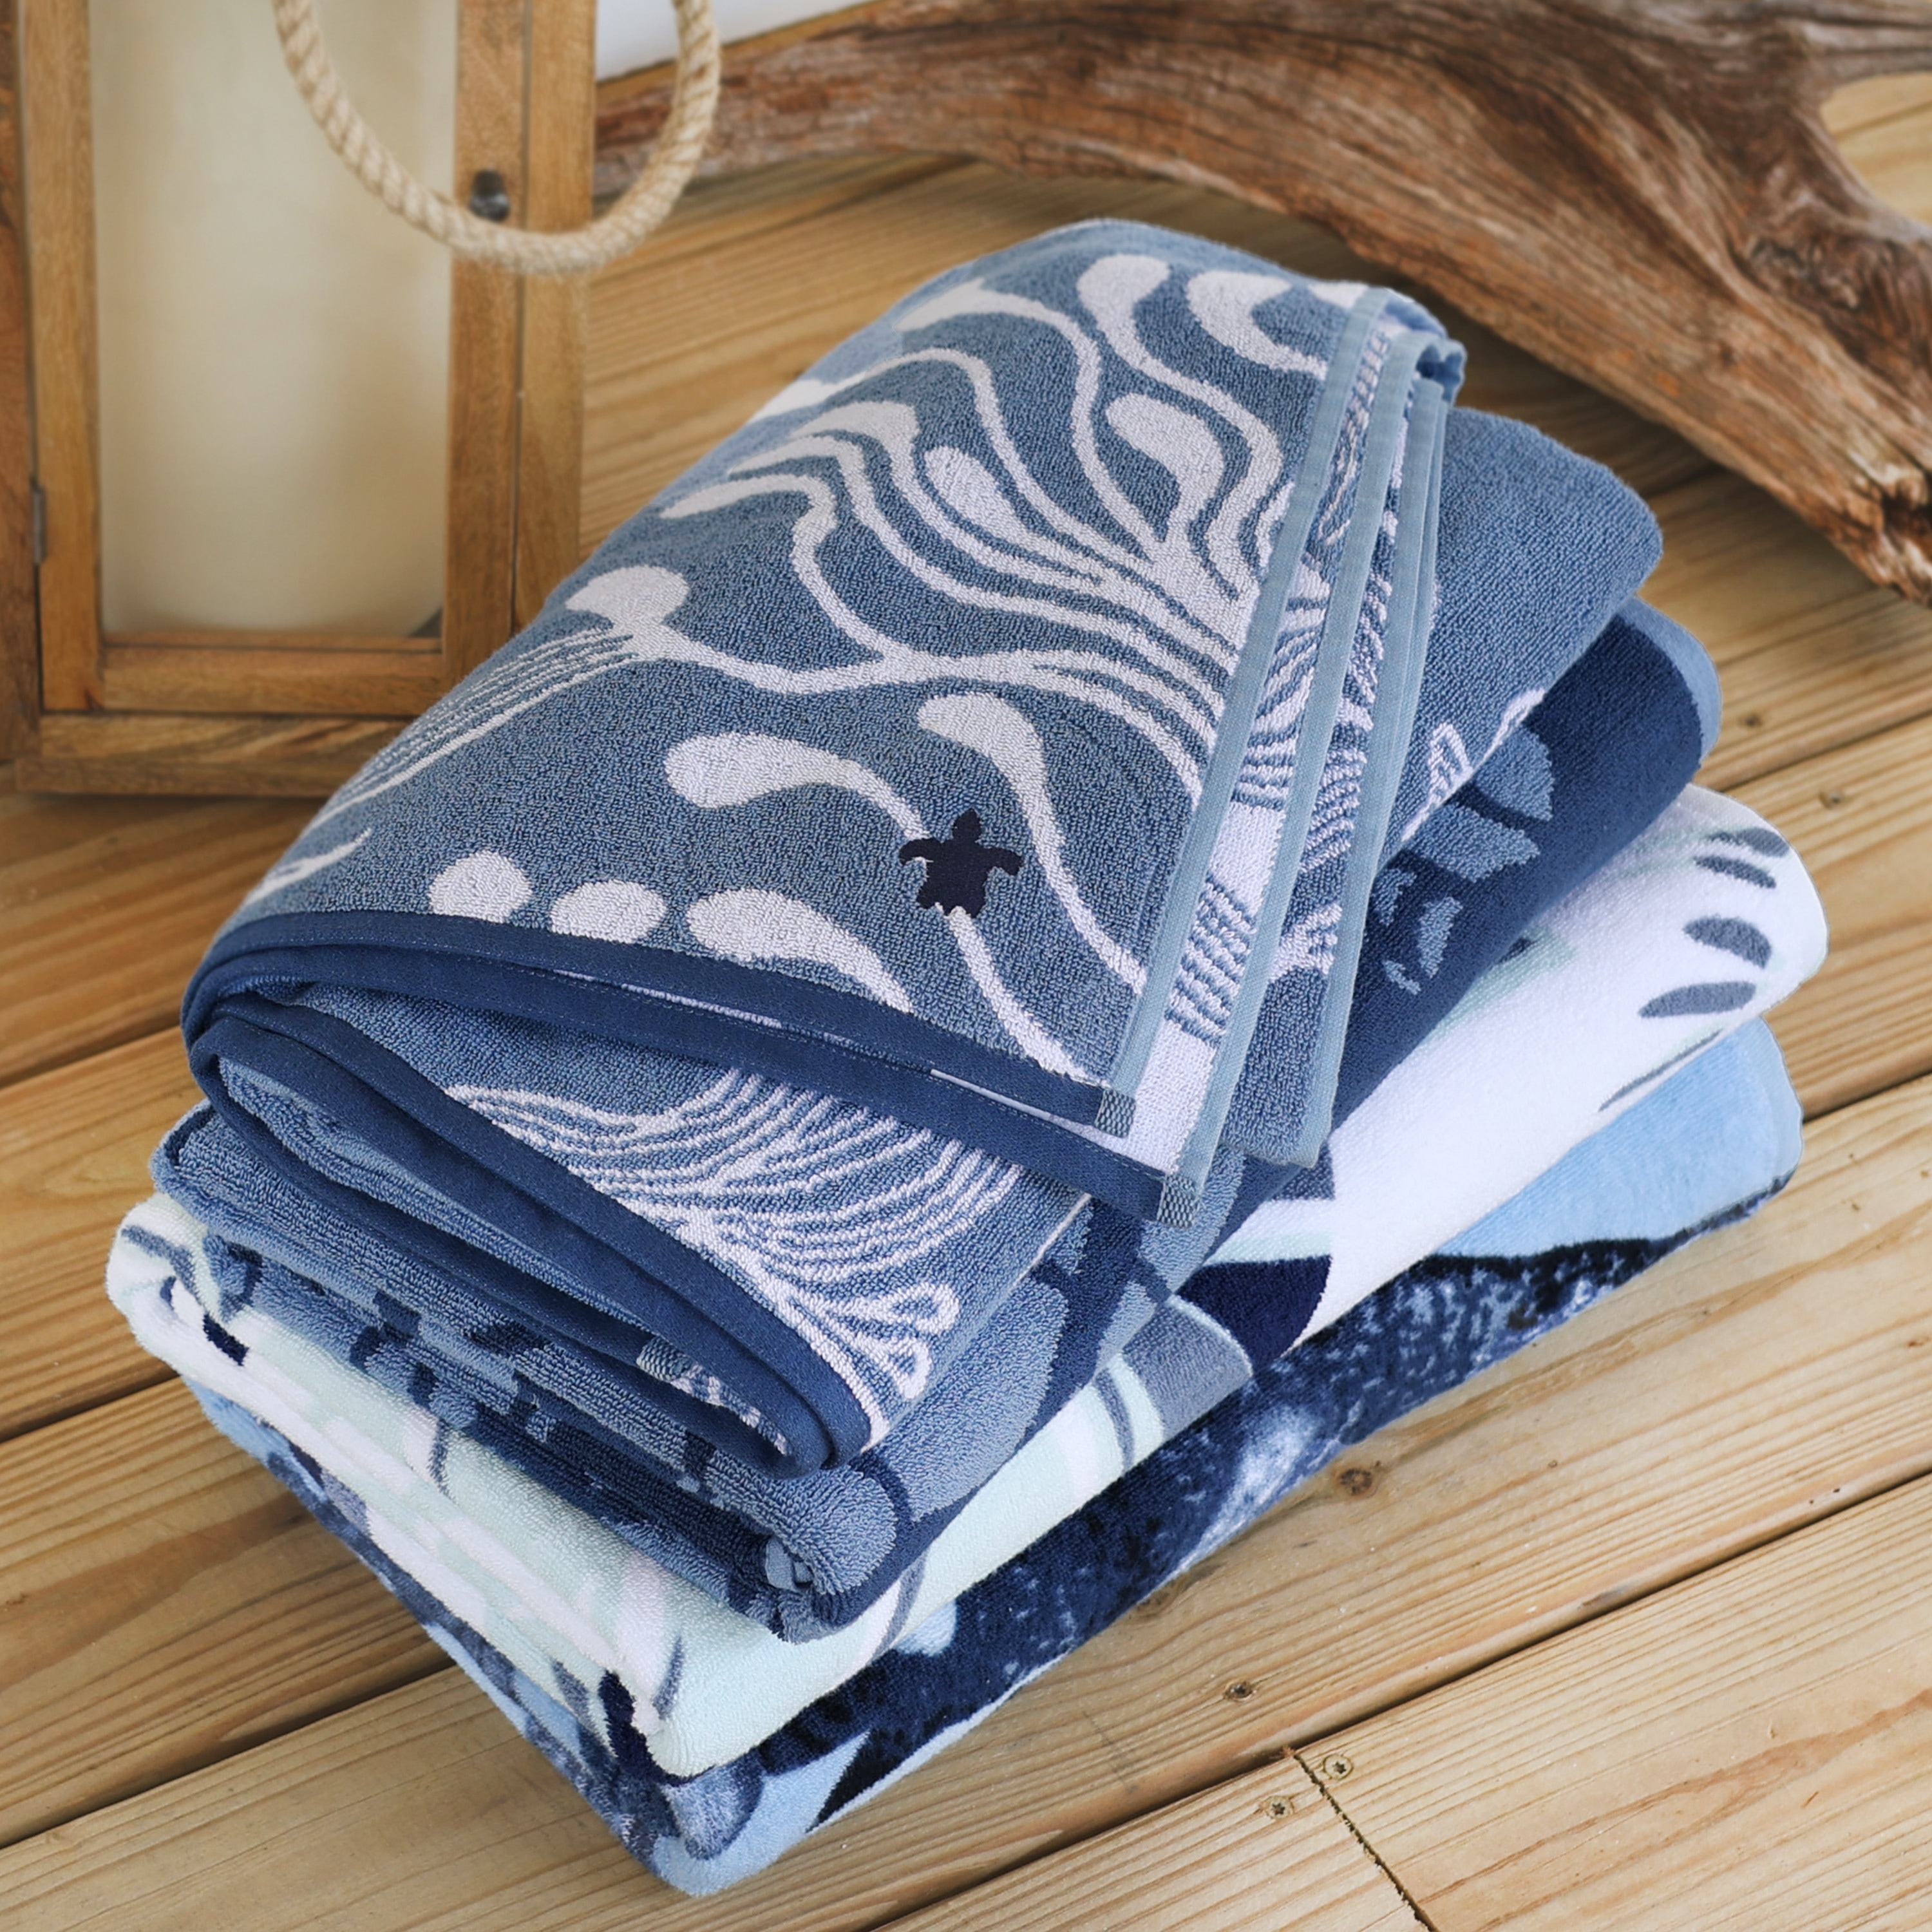 https://ak1.ostkcdn.com/images/products/is/images/direct/750c520f56551087b632ae6cab0c68fd43e9f14c/Seakeeper-Beach-Towels-80%25-Cotton-and-20%25-SEAQUAL.jpg